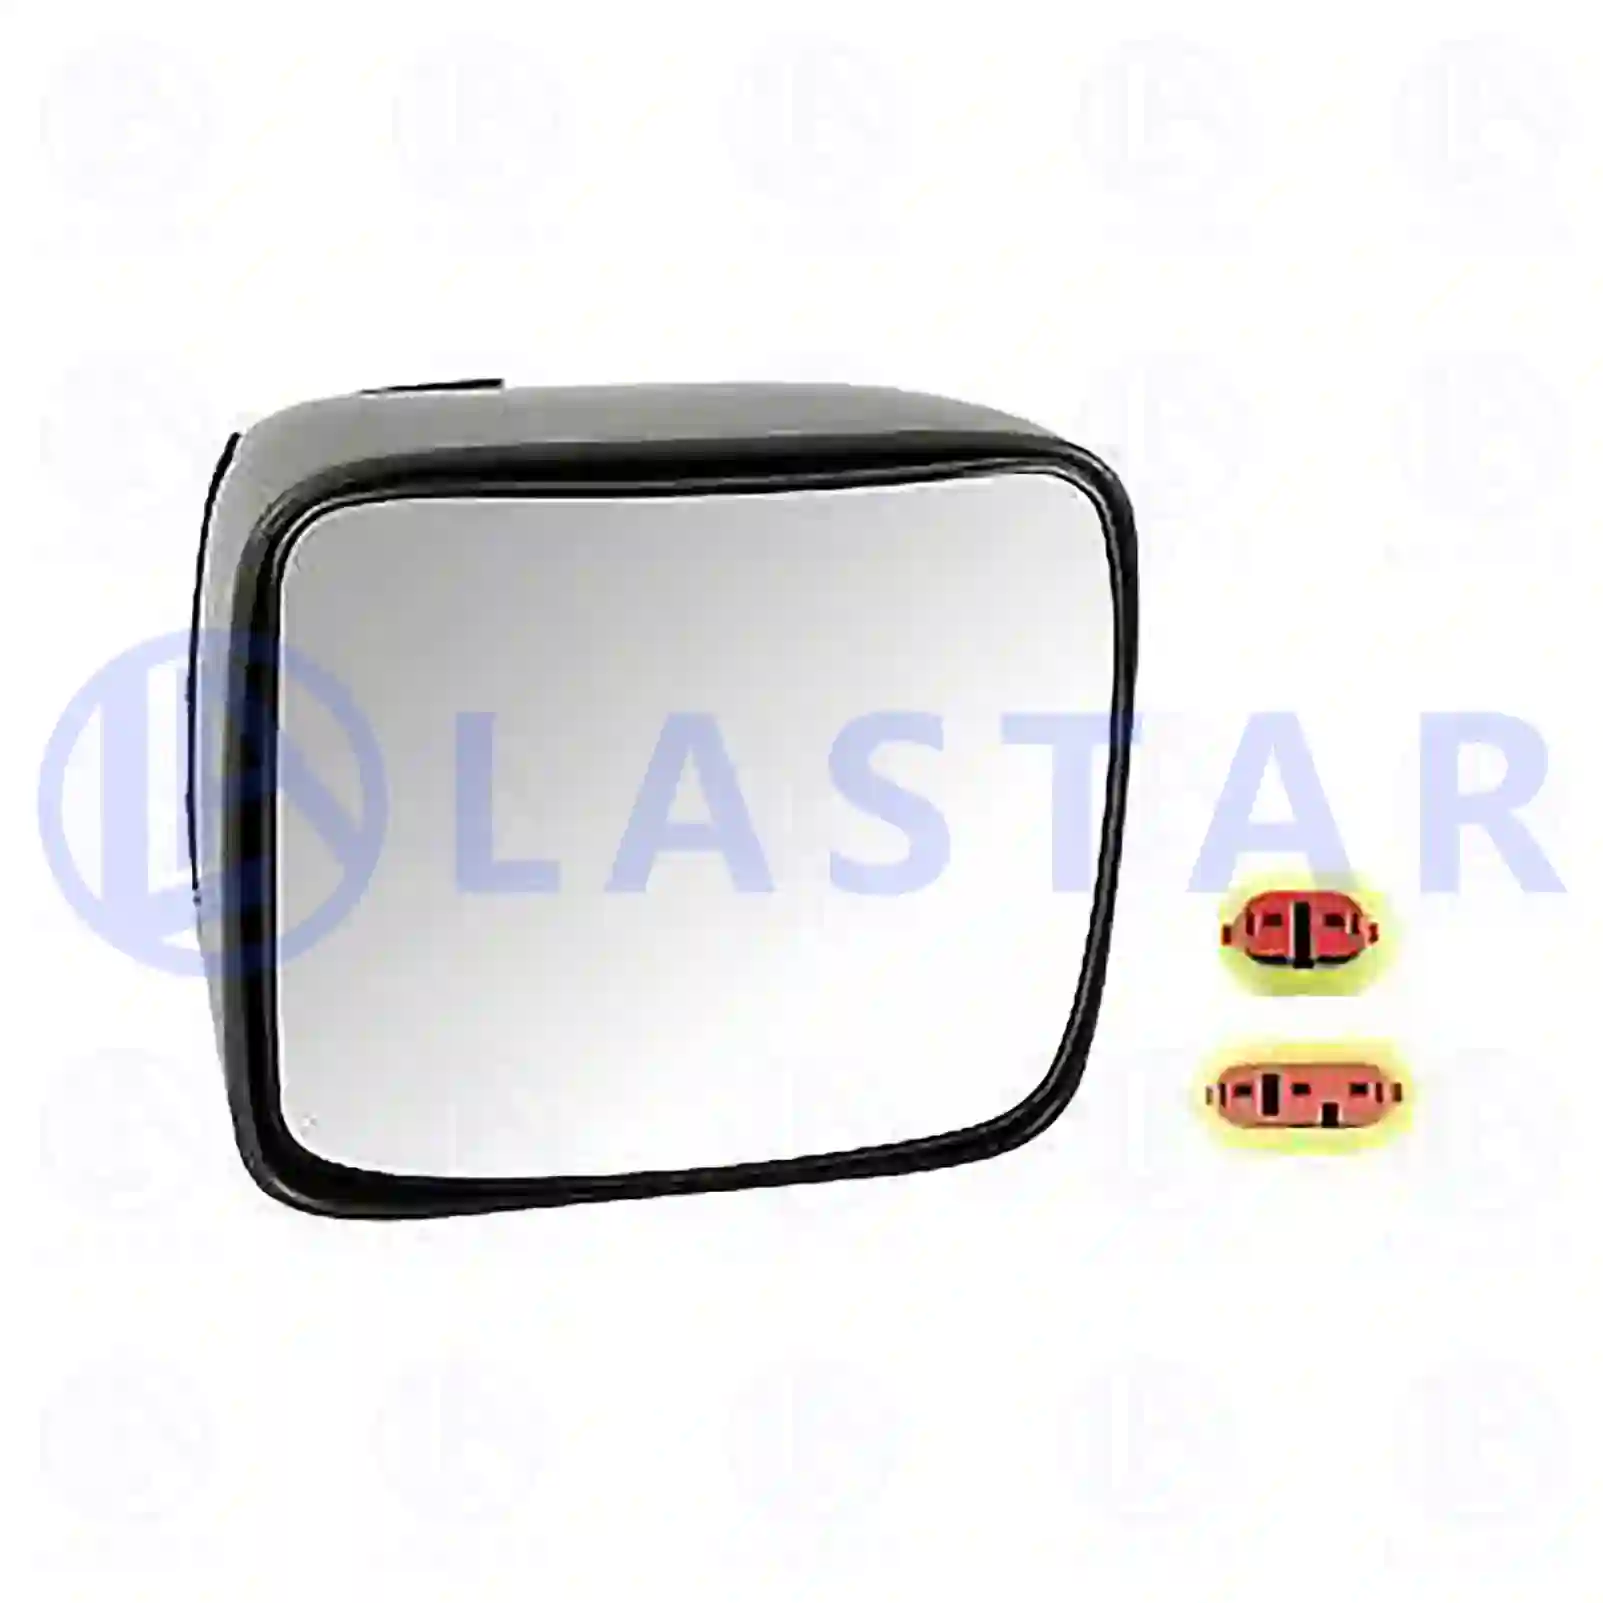 Wide view mirror, heated, electrical, 77720807, 02996671, 2996671, 504132249 ||  77720807 Lastar Spare Part | Truck Spare Parts, Auotomotive Spare Parts Wide view mirror, heated, electrical, 77720807, 02996671, 2996671, 504132249 ||  77720807 Lastar Spare Part | Truck Spare Parts, Auotomotive Spare Parts